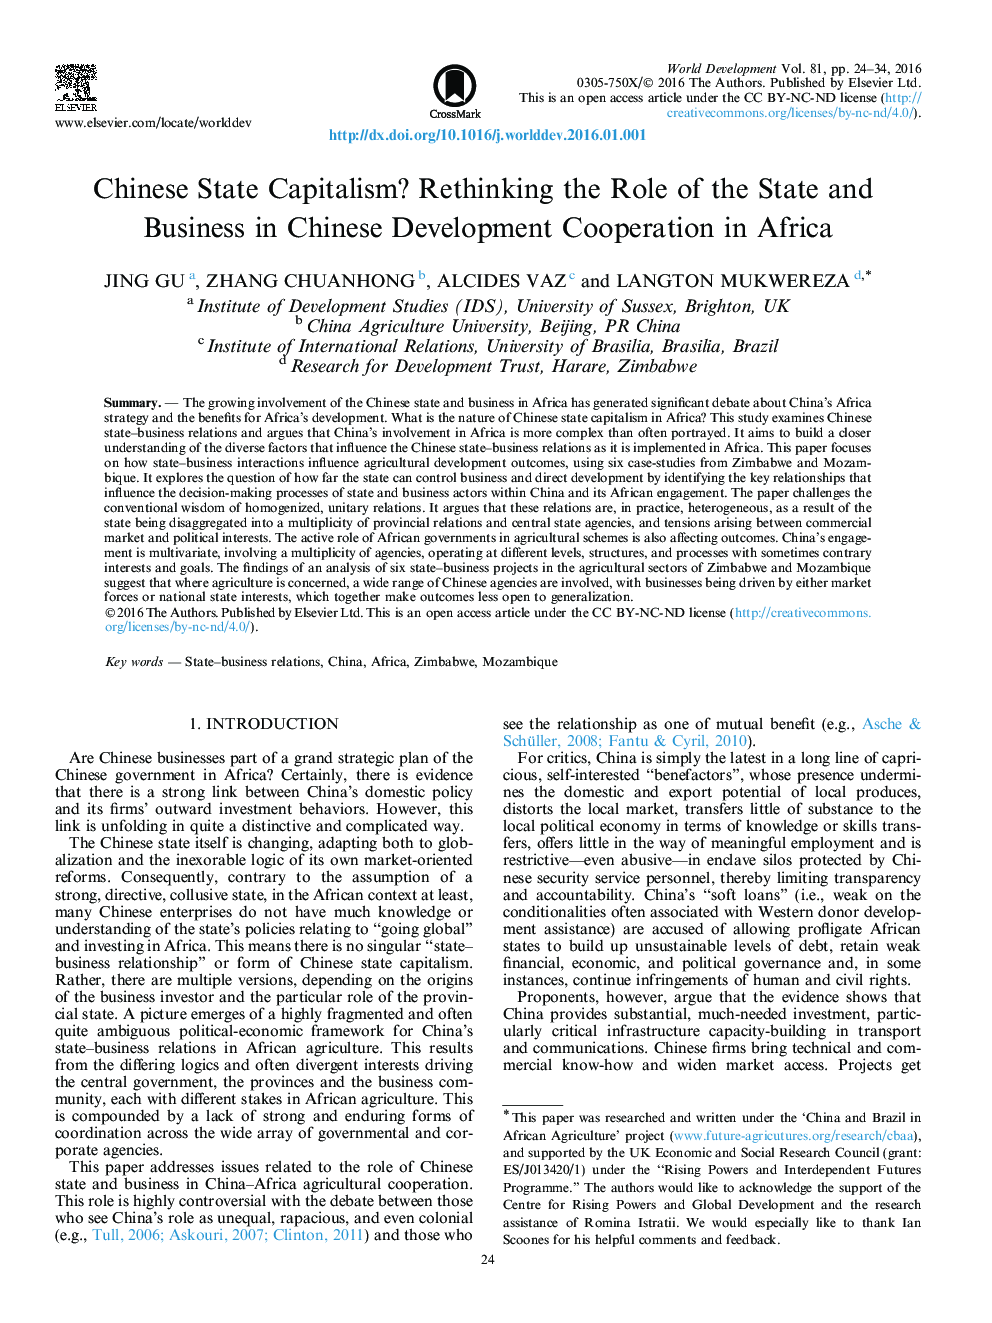 Chinese State Capitalism? Rethinking the Role of the State and Business in Chinese Development Cooperation in Africa